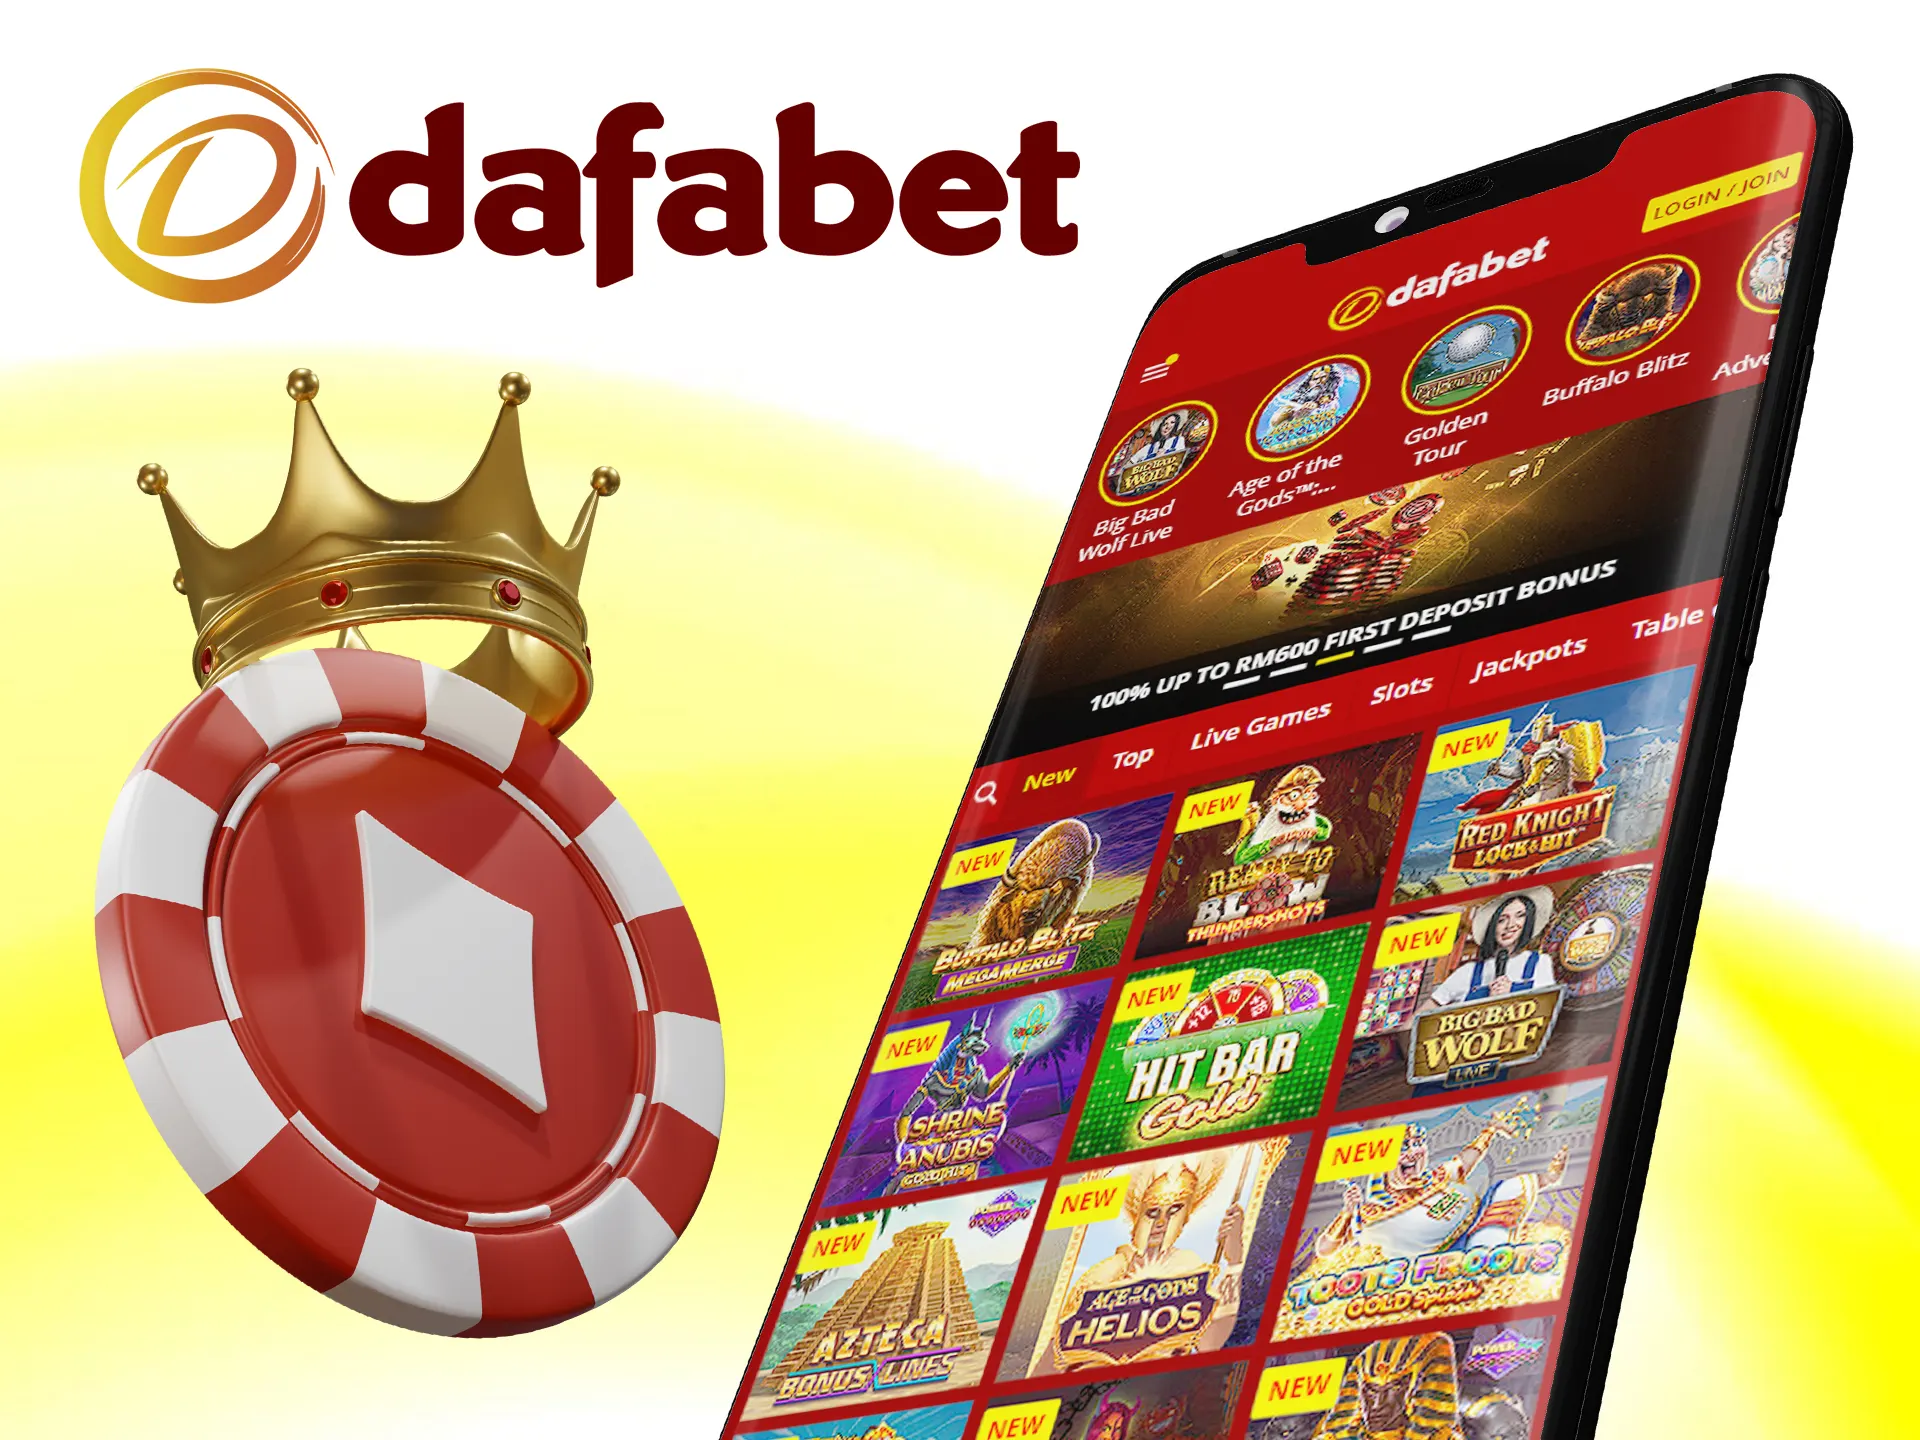 Dafabet app is a great way for playing casino games.